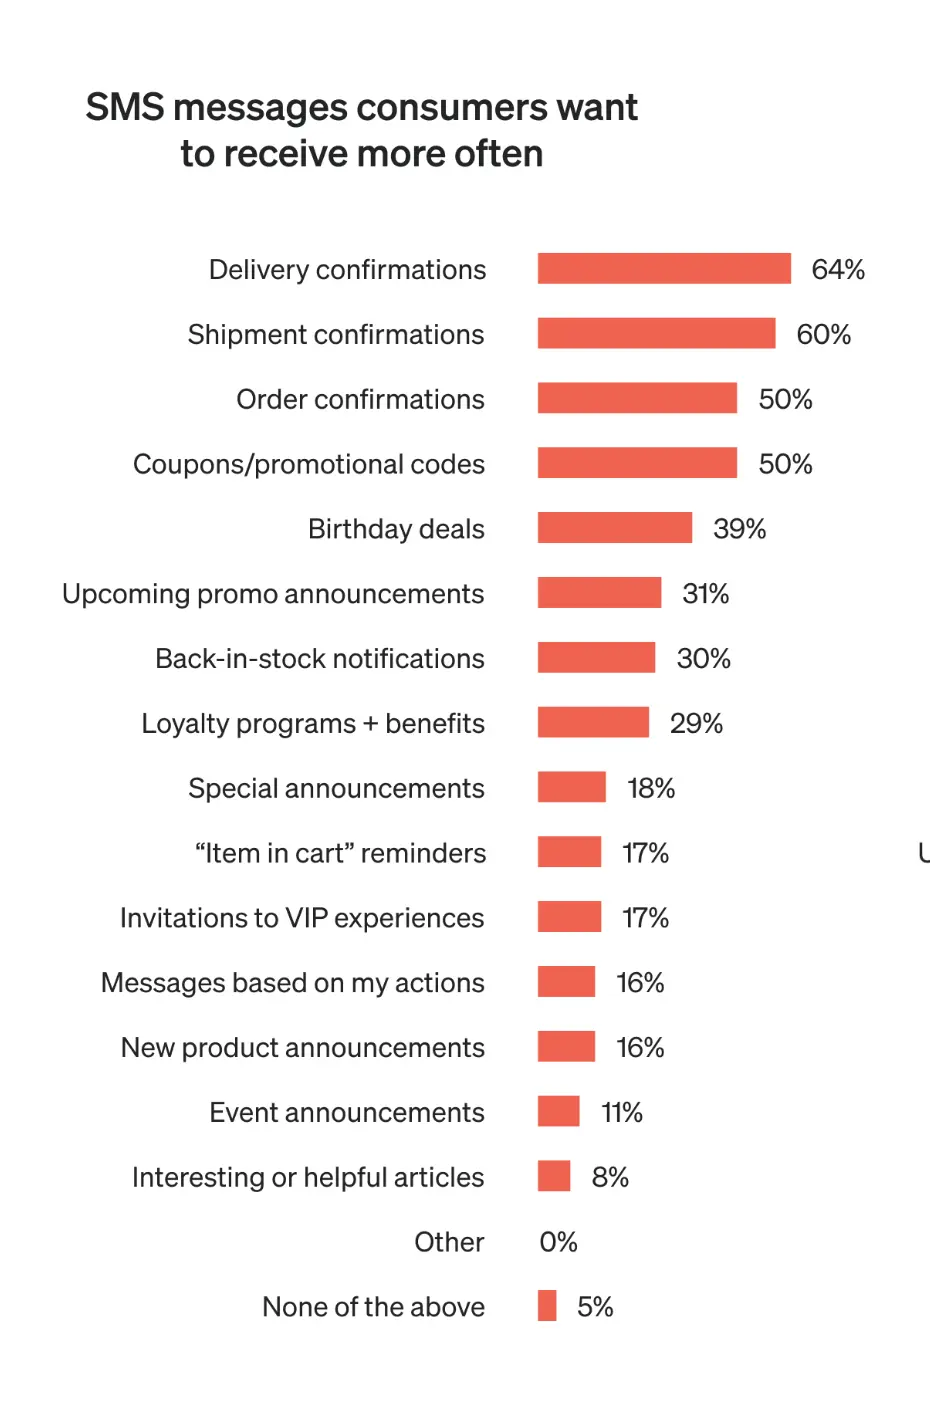 Image shows a vertical bar graph with salmon-colored bars titled “SMS messages consumers want to receive more often.” The top 5 bars on the graph include delivery confirmations (64%), shipment confirmations (60%), order confirmations (50%), coupons and promotional codes (50%), and birthday deals (39%).